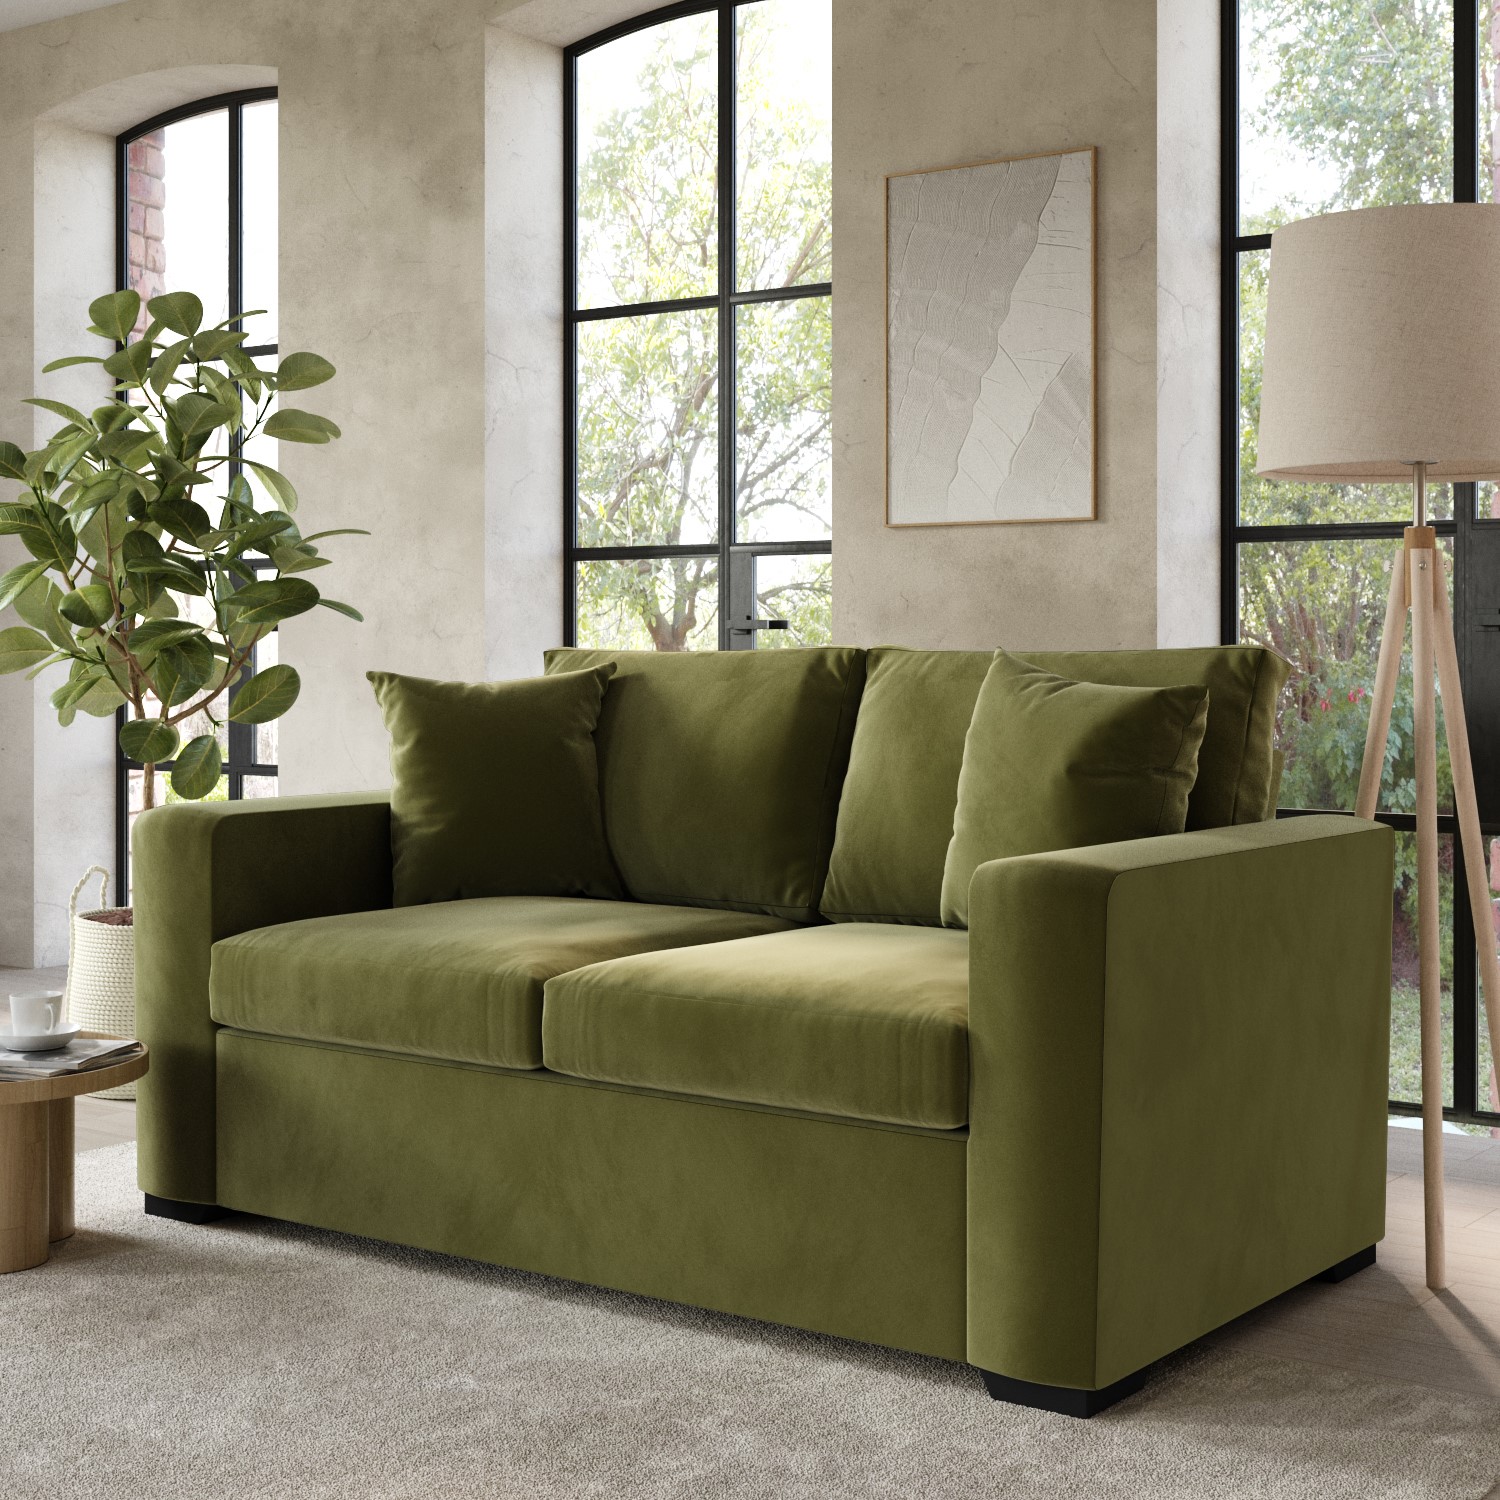 Photo of Olive green velvet pull out sofa bed - seats 2 - layton